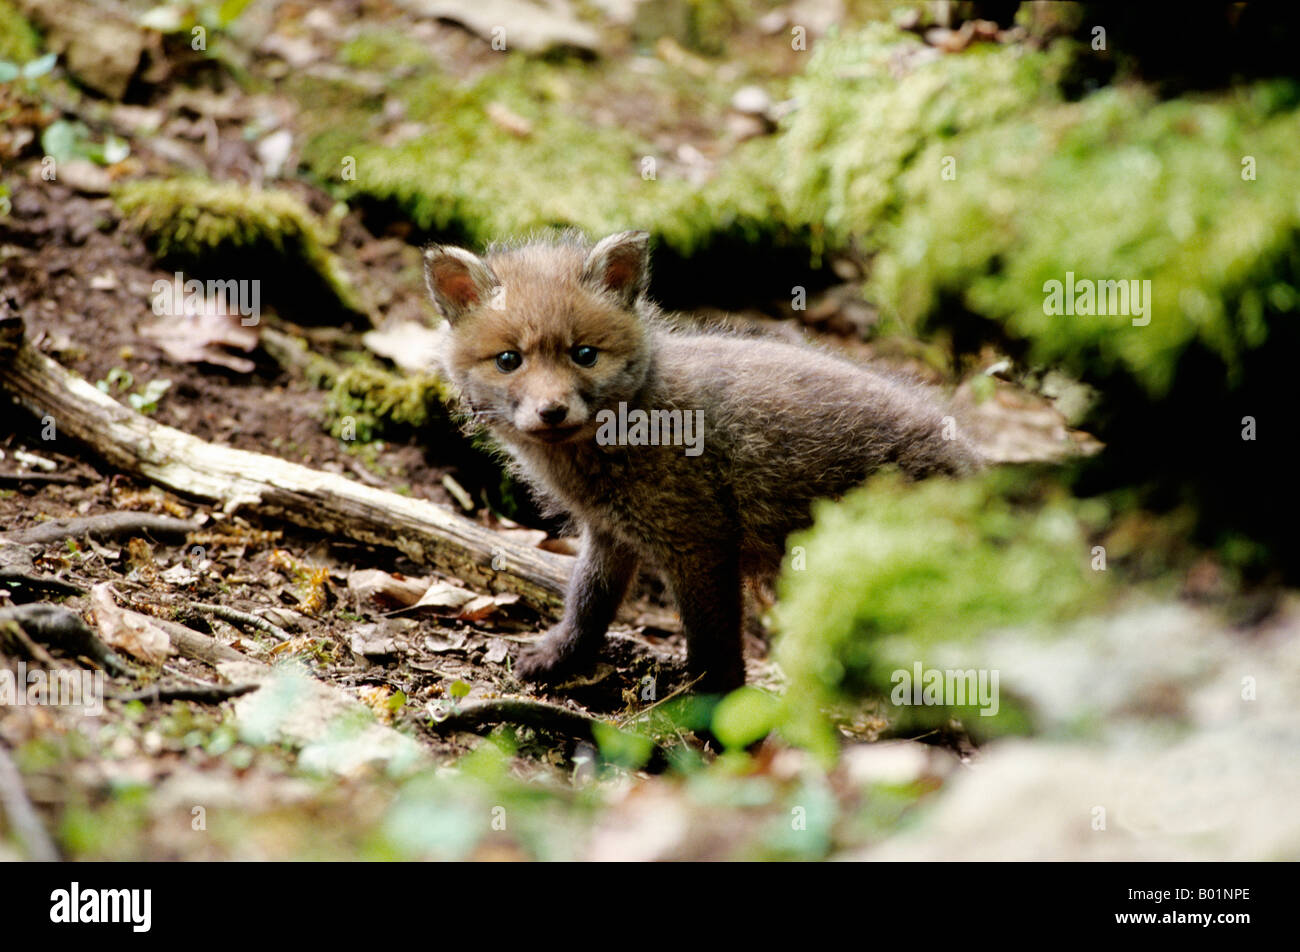 Red Fox Vulpes vulpes young looking out from den Asia Asien Canidae Canoidea Carnivora DVD 4 Europa Europe Fuchs Fuchsbabies Fuc Stock Photo